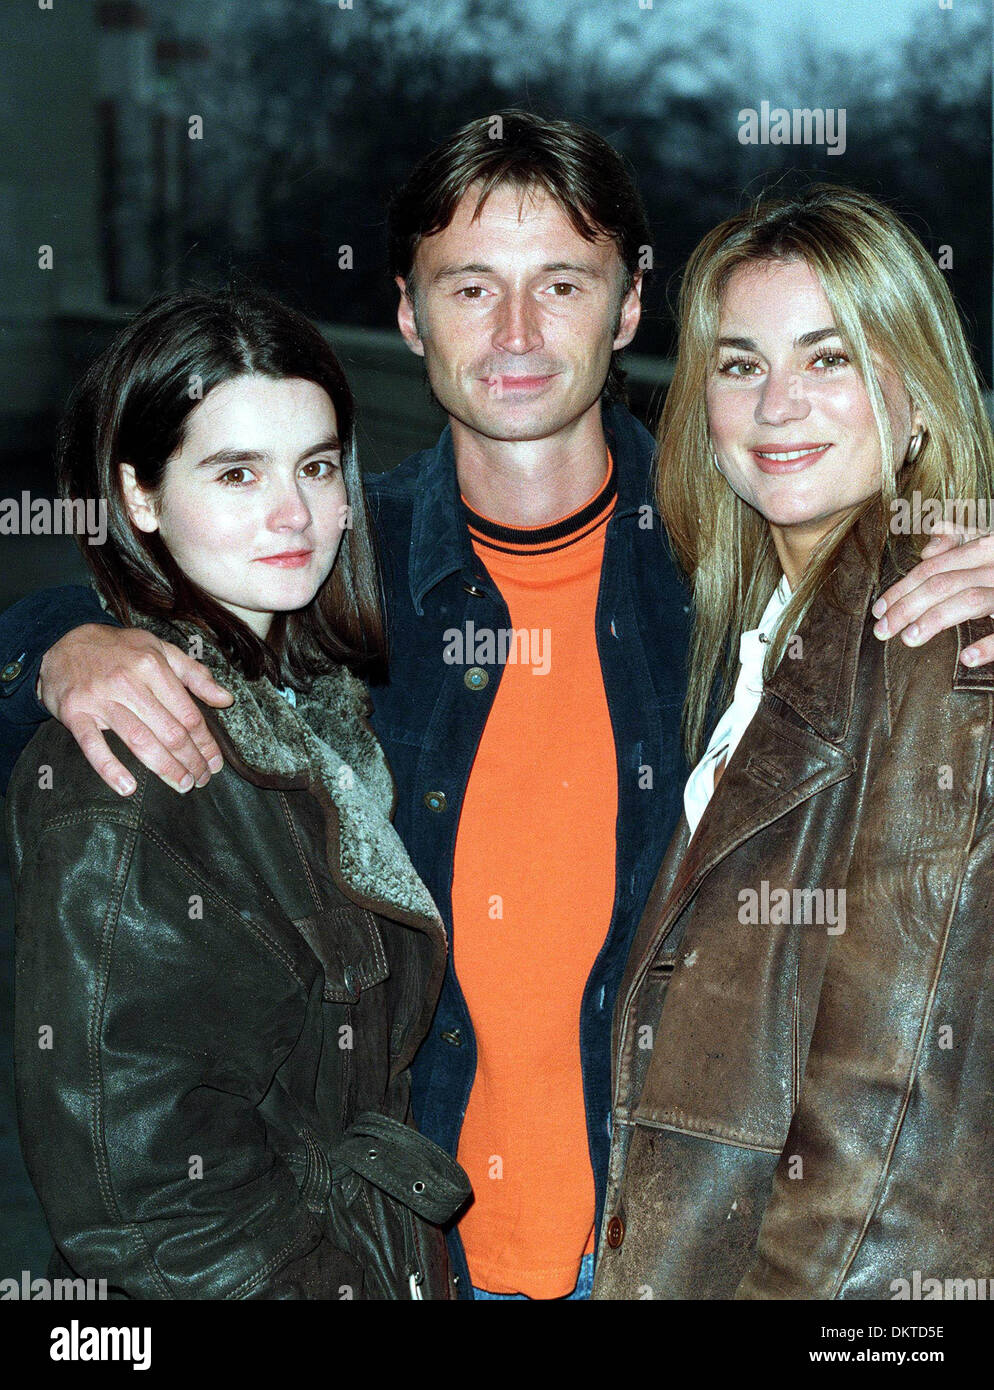 S HENDERSON, R CARLYLE,V GOGAN.ACTRESS & ACTOR.08/03/1996.G26C9 Stock Photo